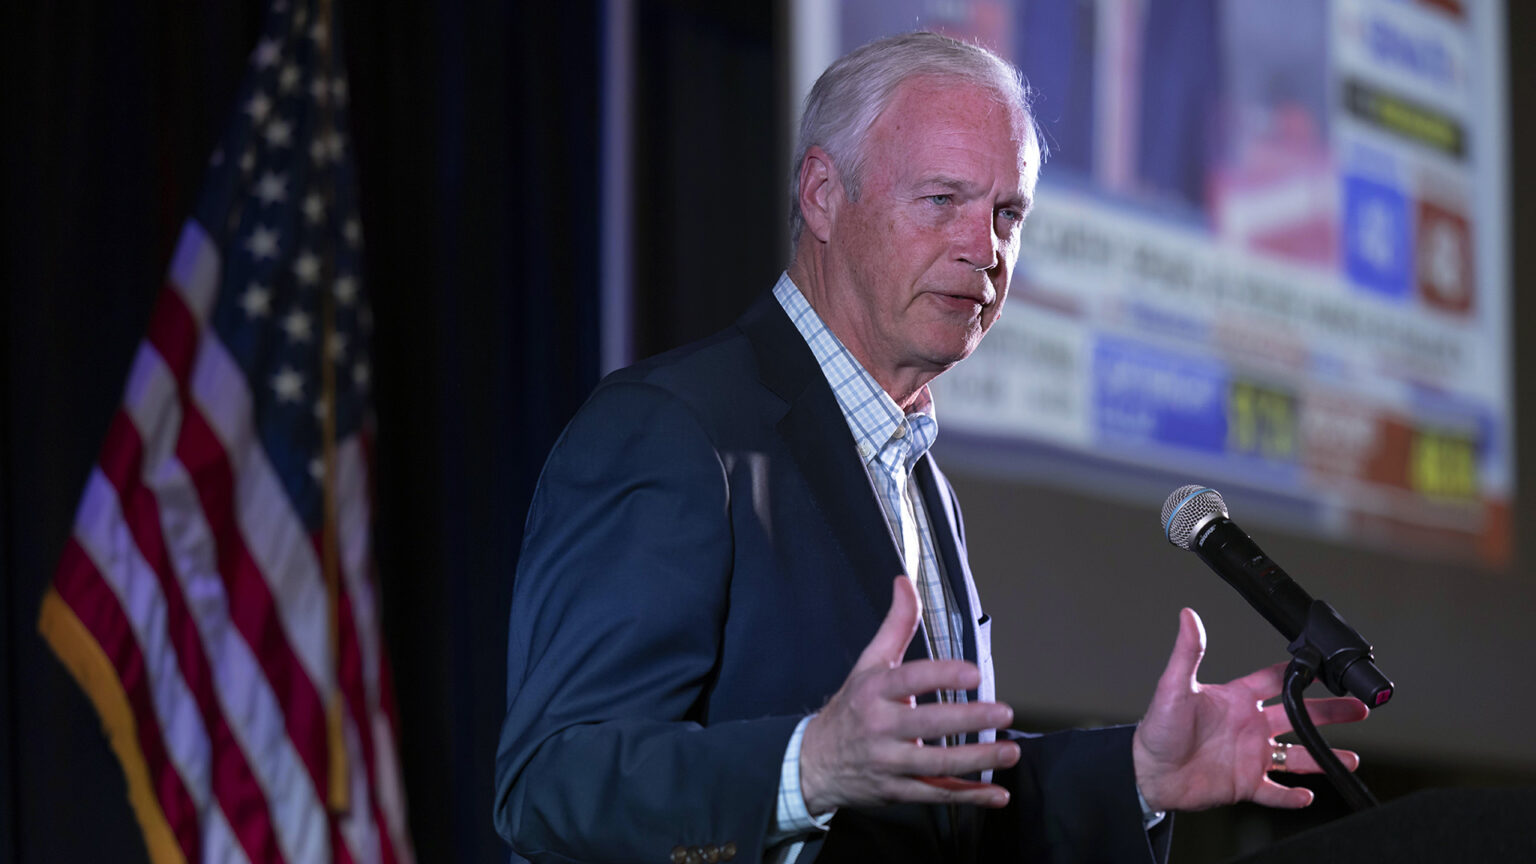 Ron Johnson stands behind a podium and speaks into a microphone while gesturing with both hands, with a U.S flags and projector screen in the background.